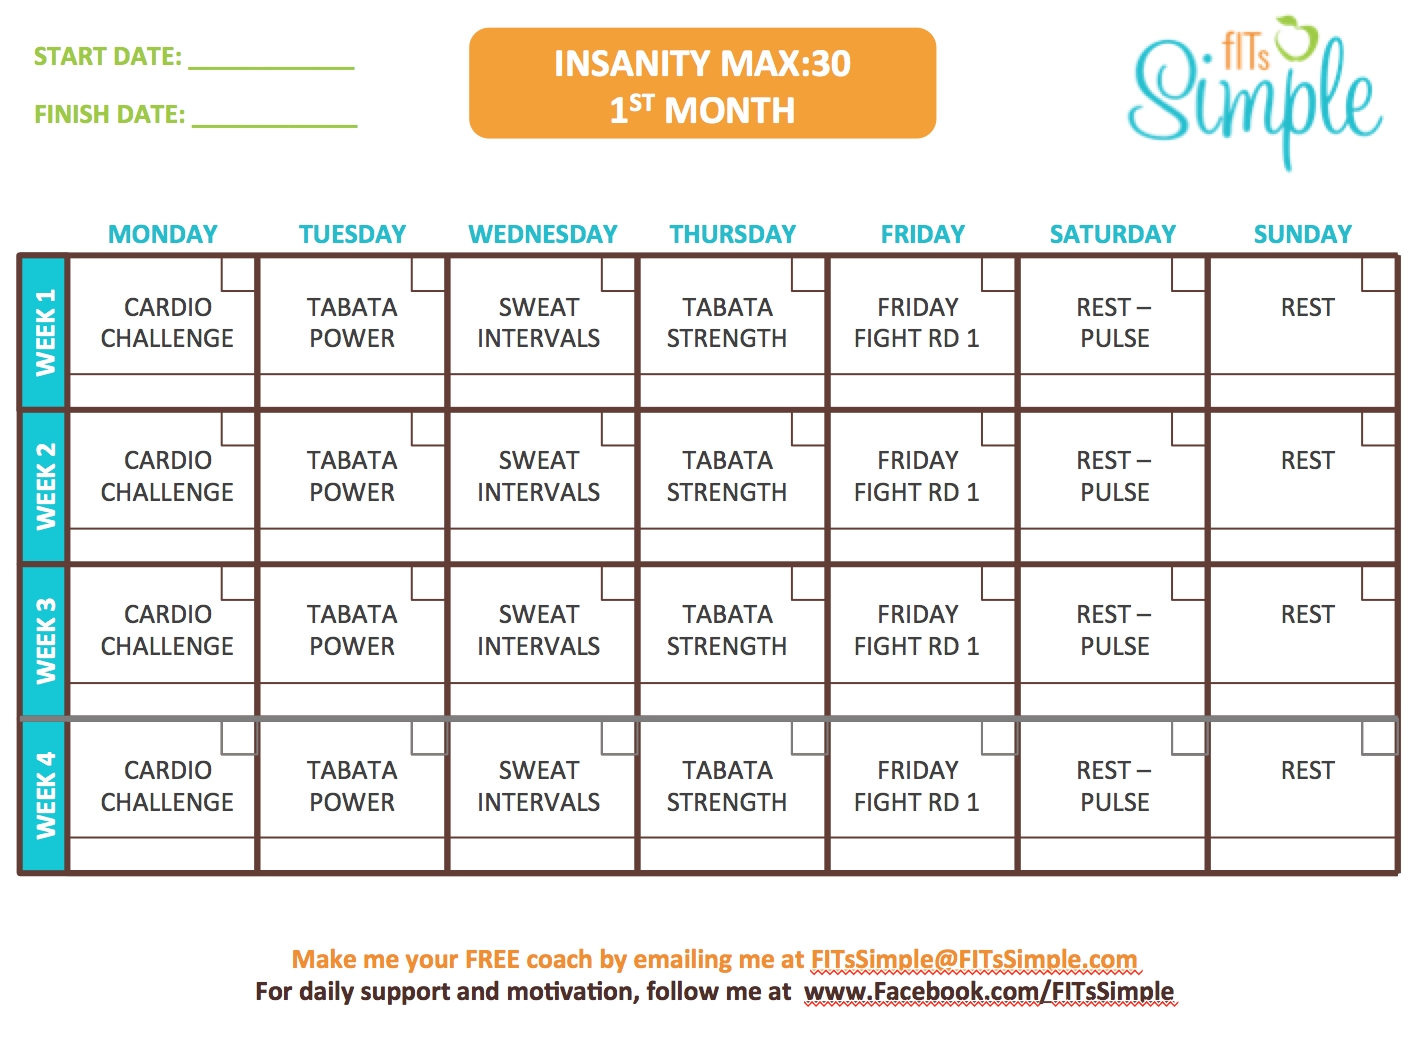 Insanity Max 30 Workout Calendar - Free Download!! | Workout Impressive Insanity Max 30 Printable Calendar